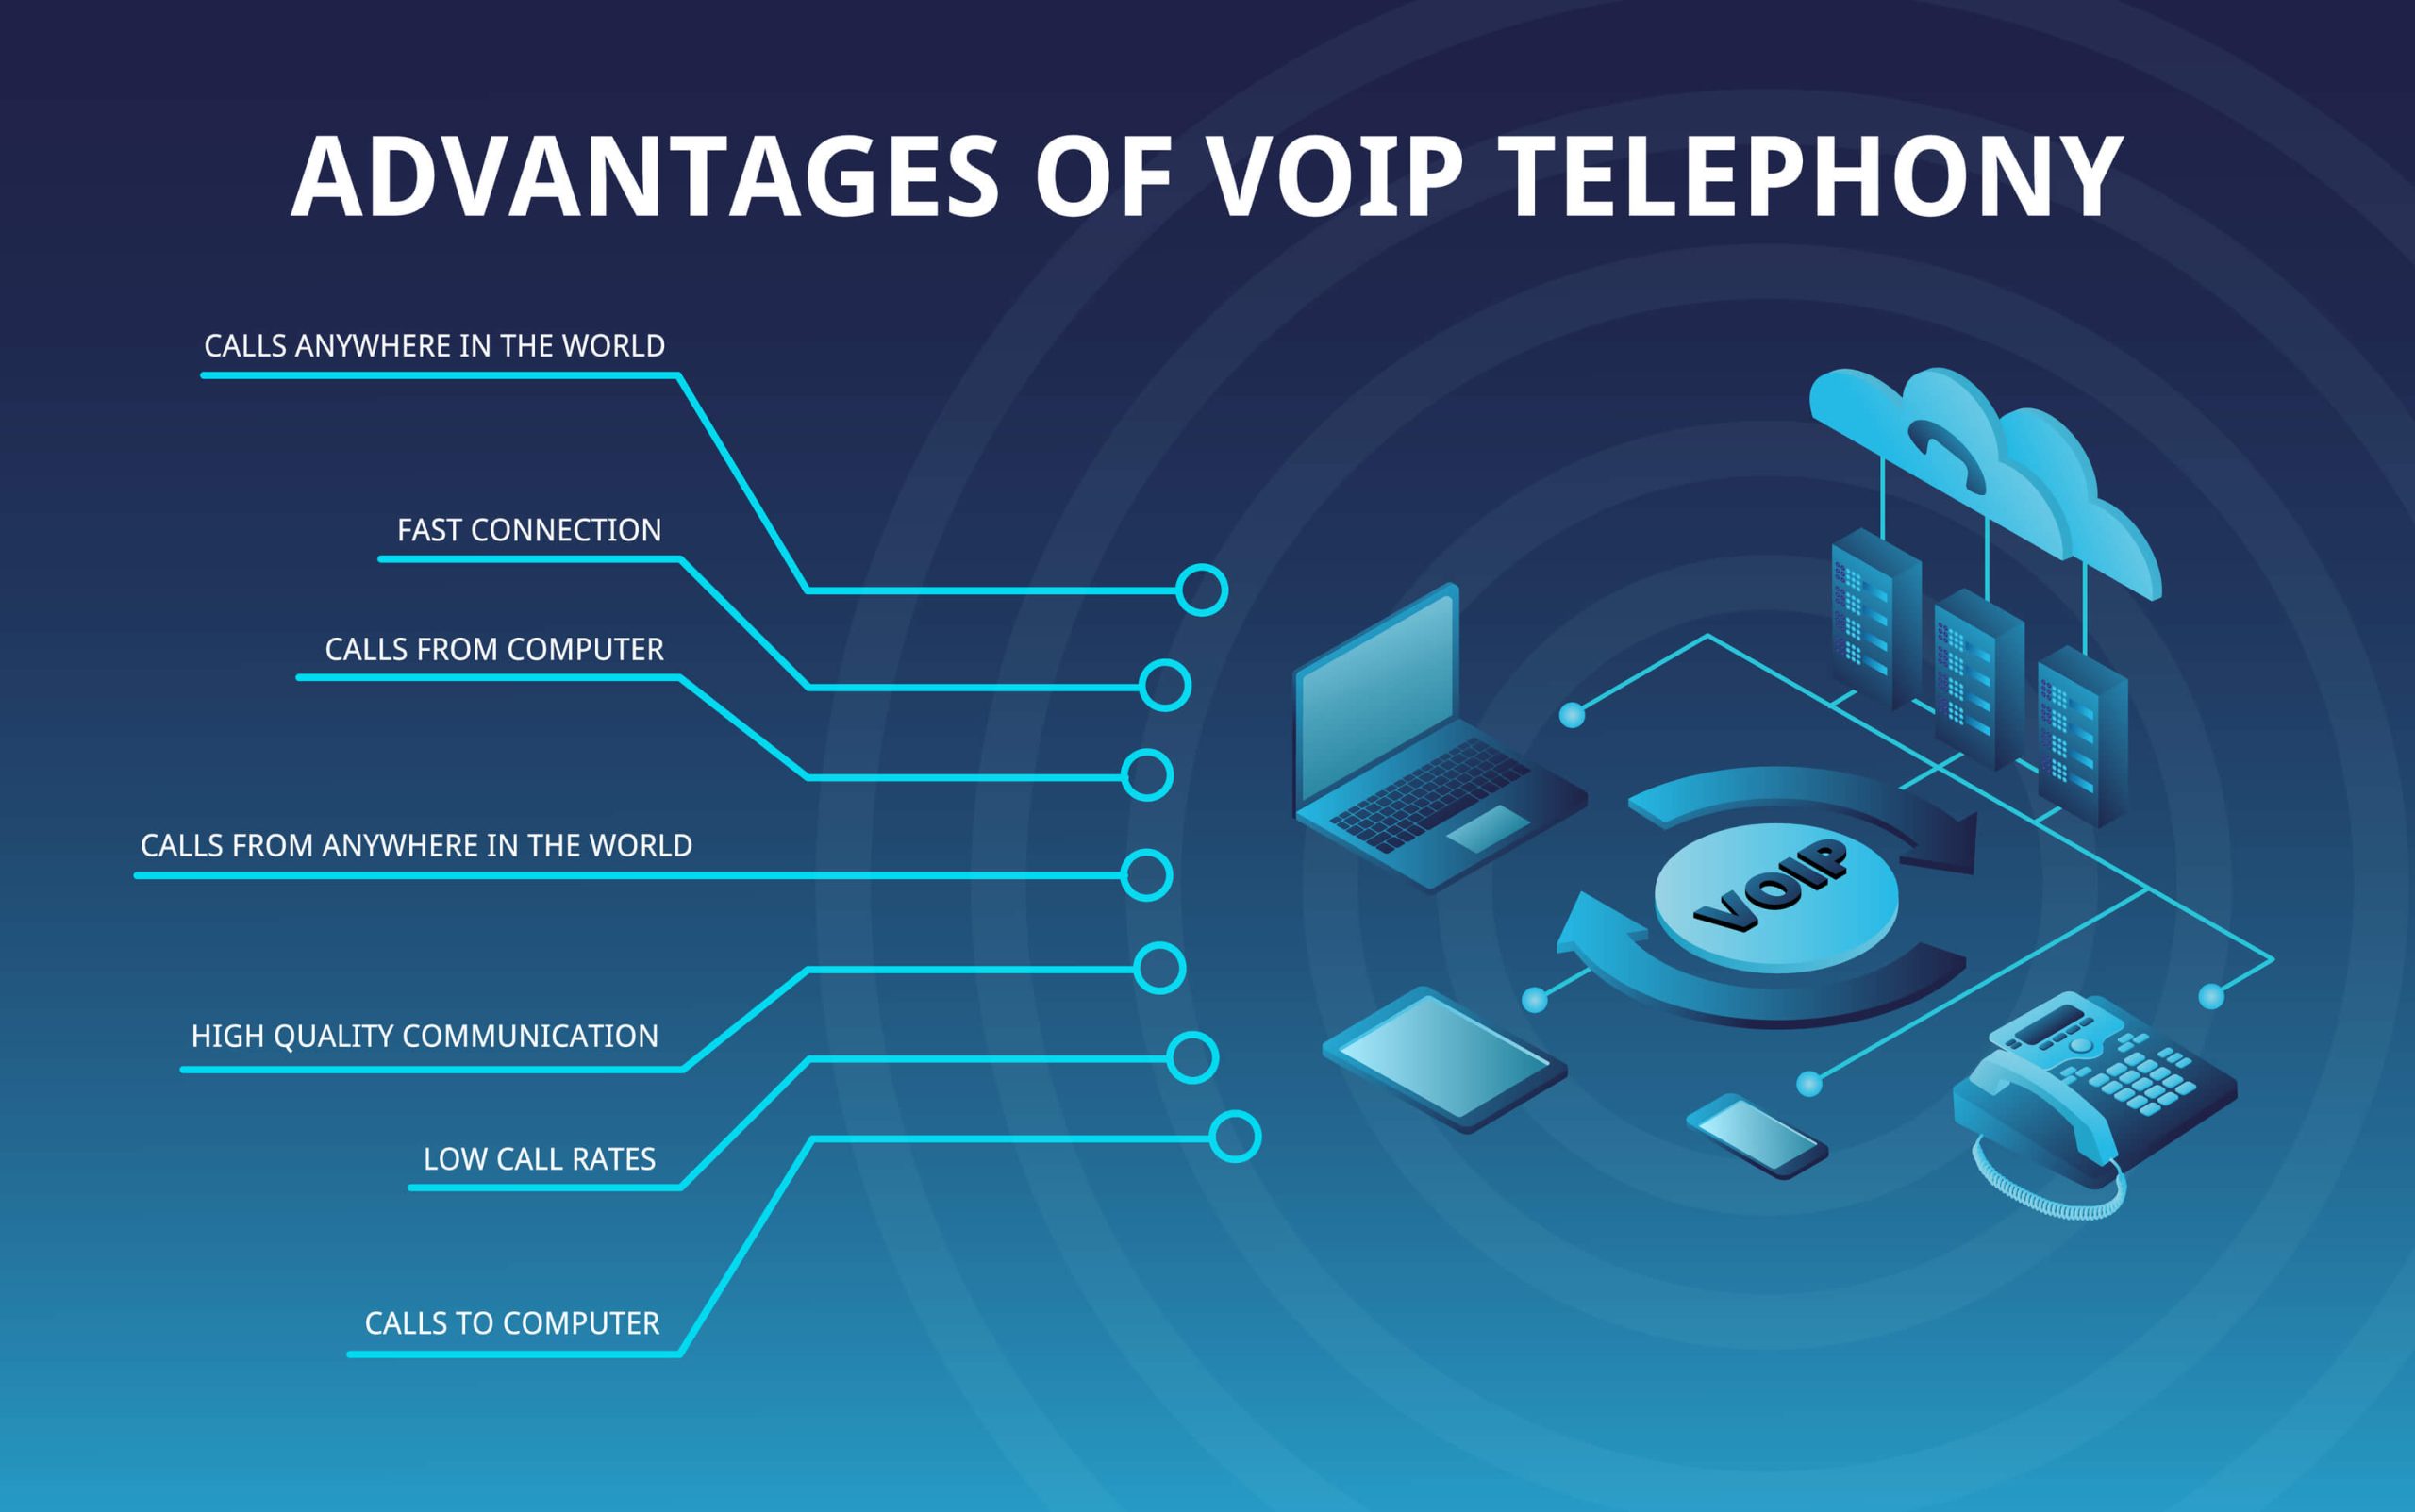 Graphic showing advantages of VOIP Telephony.